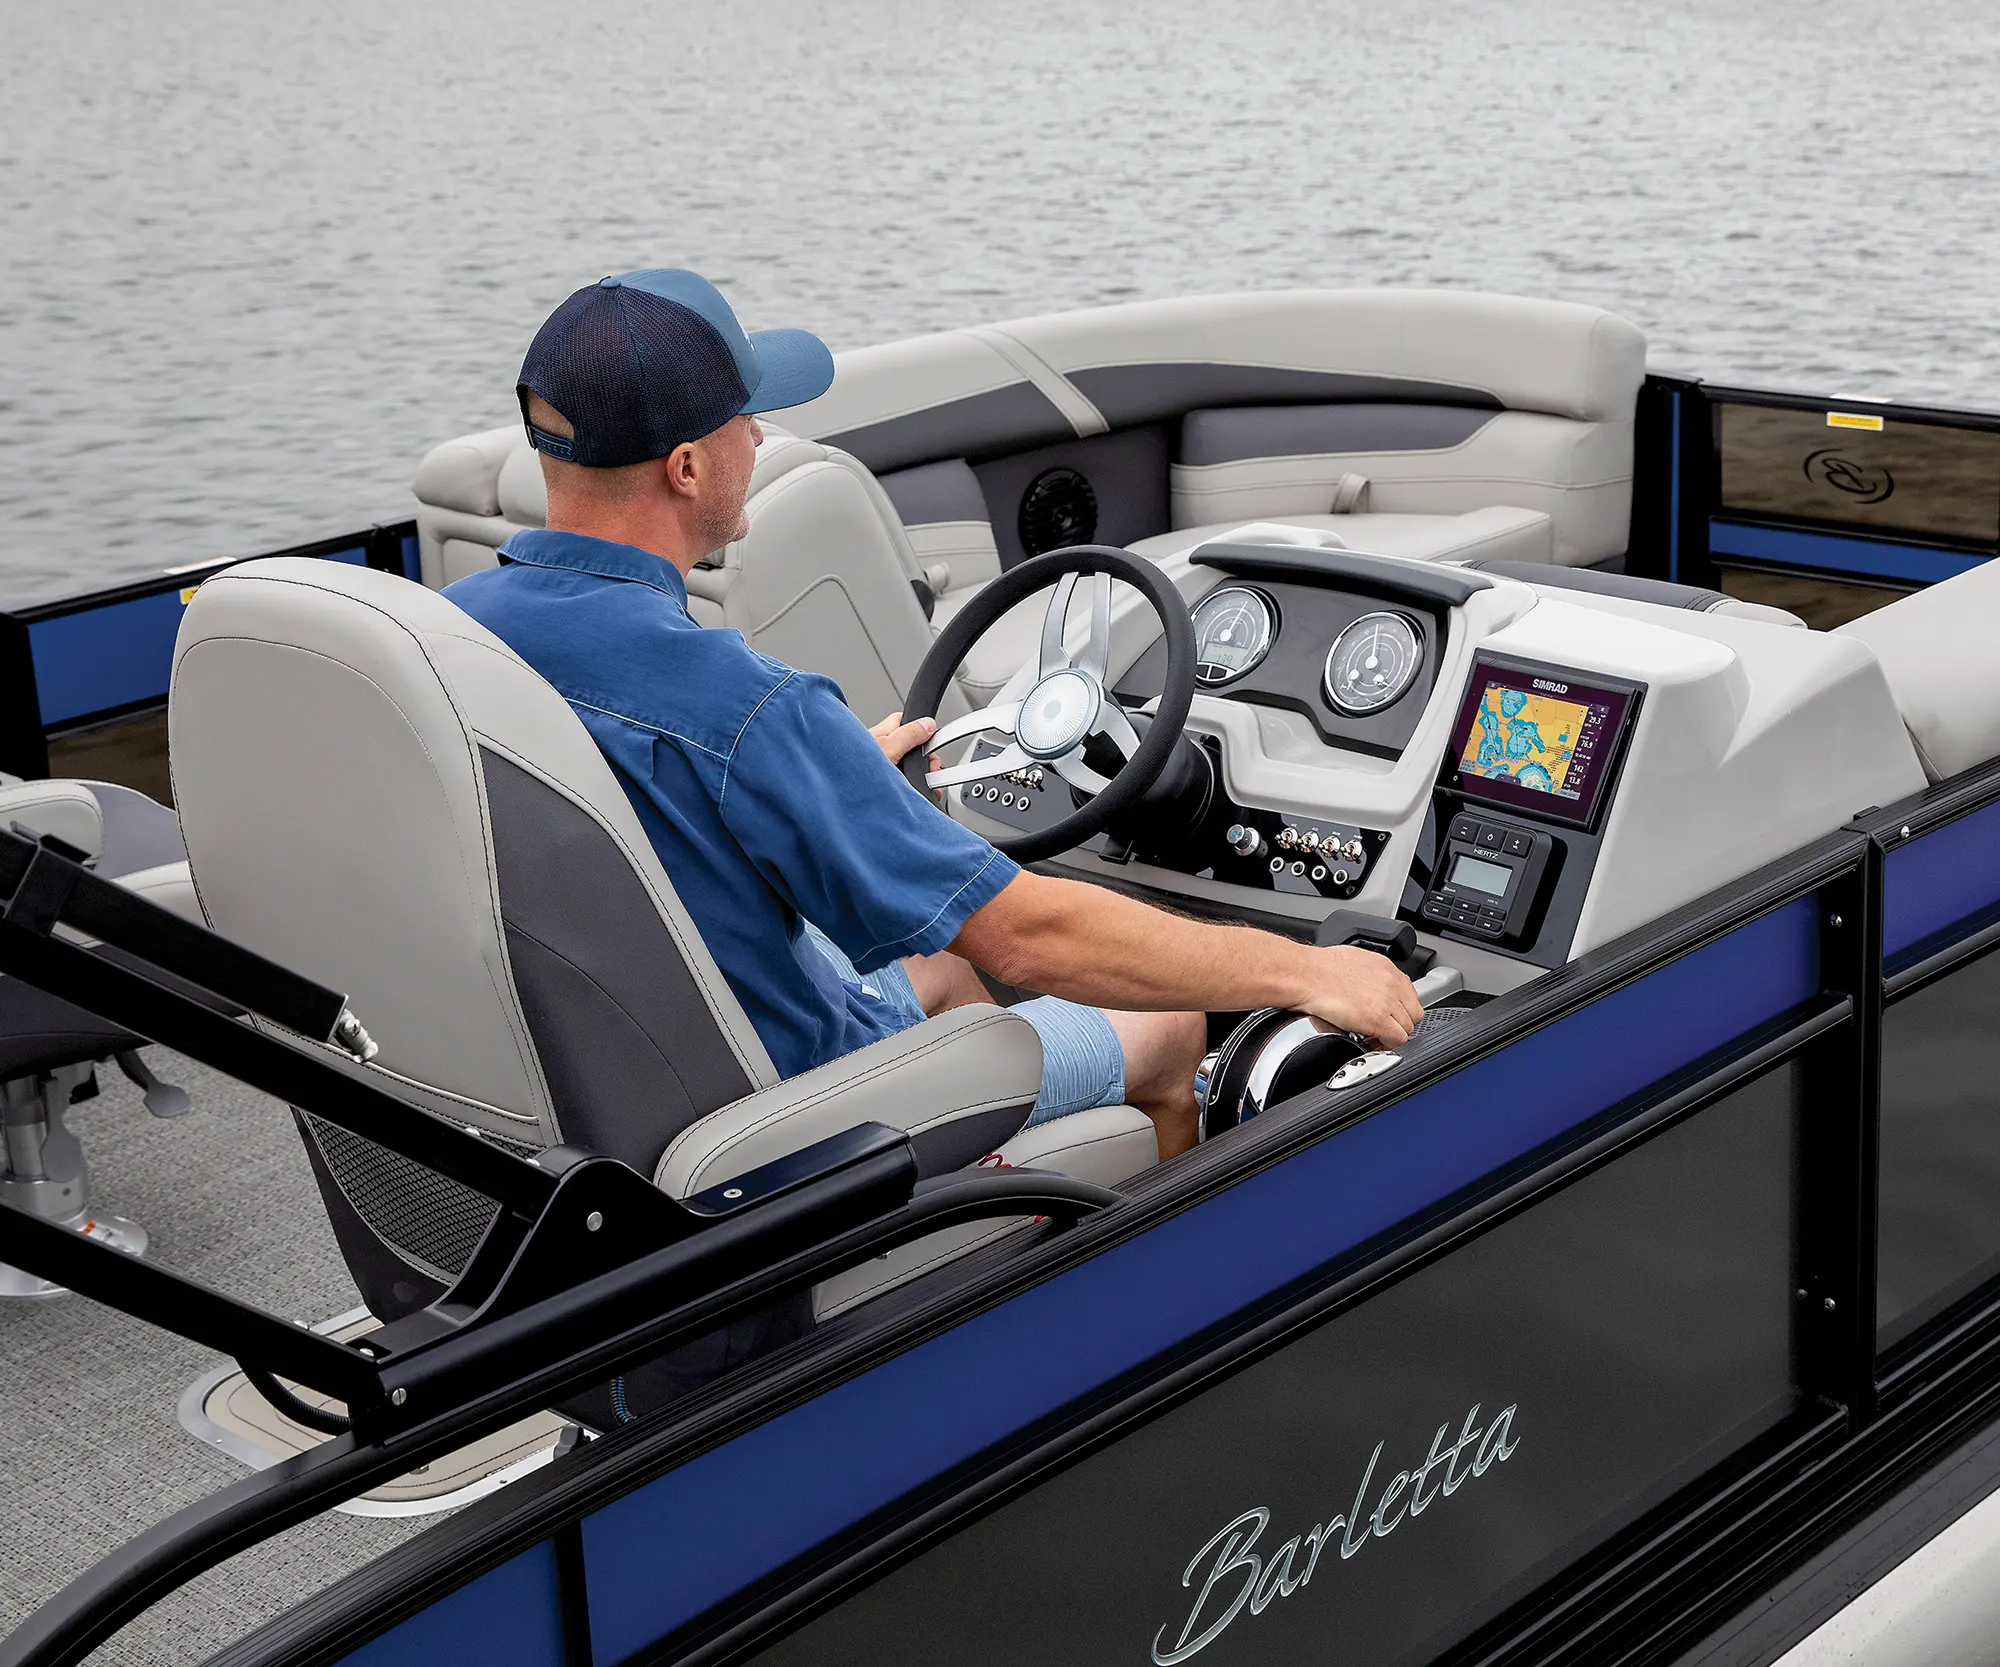 Landscape close-up photograph of a man in a dark blue button-up shirt and dark blue snapback hat in the driver's seat driving the Barletta Cabrio C22UC pontoon motorboat vehicle out in the water